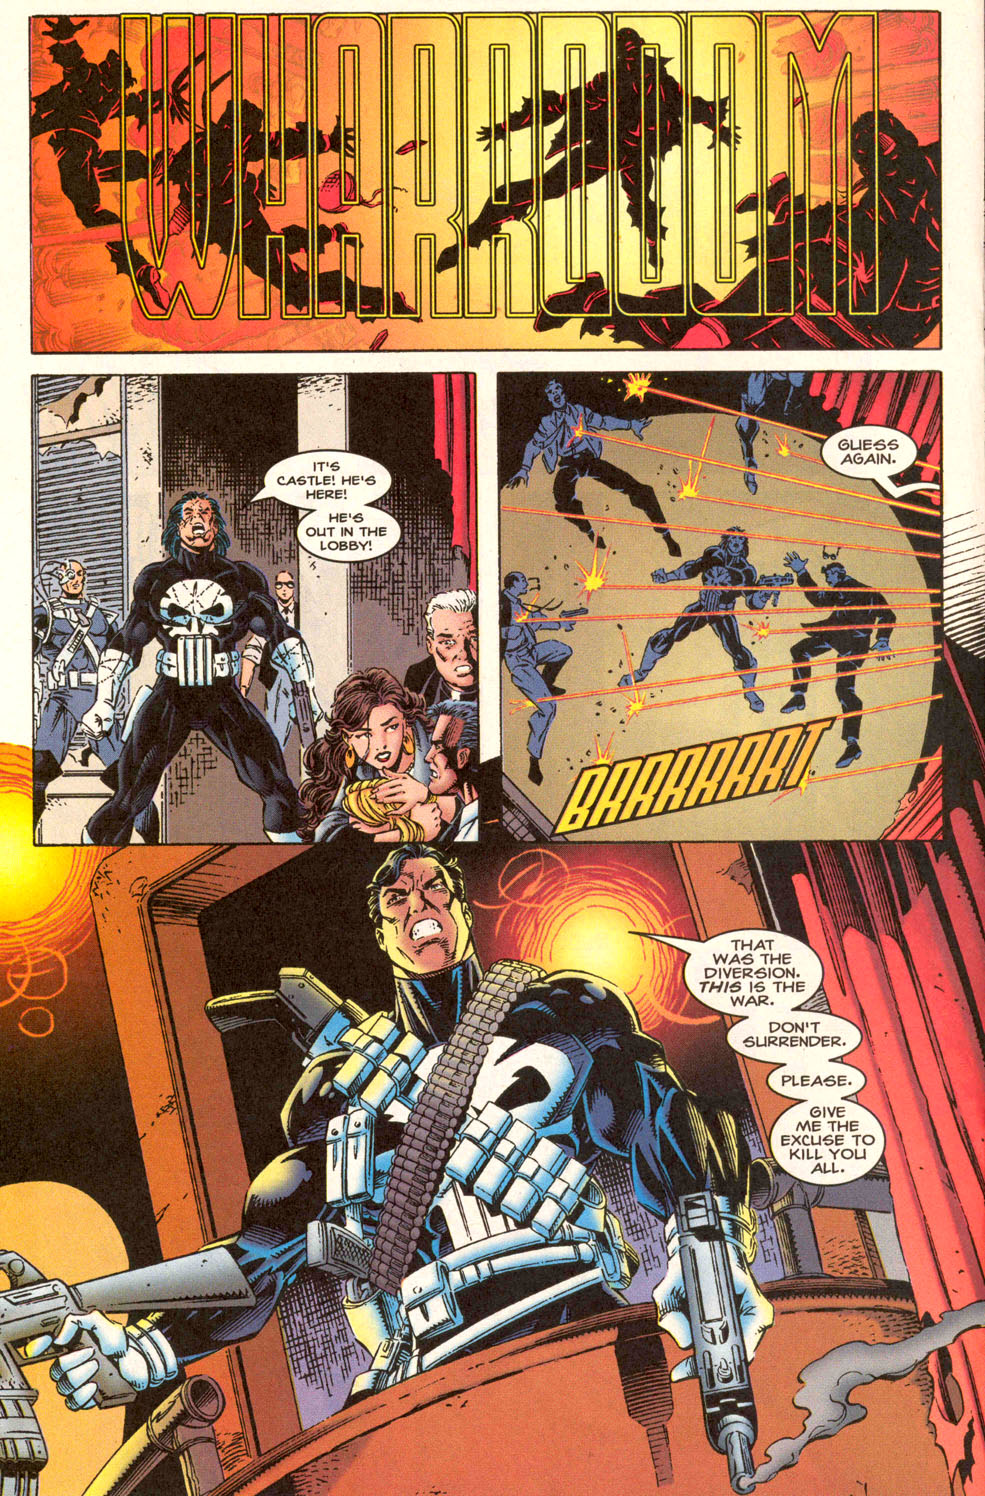 Punisher (1995) issue 10 - Last Shot Fired - Page 16